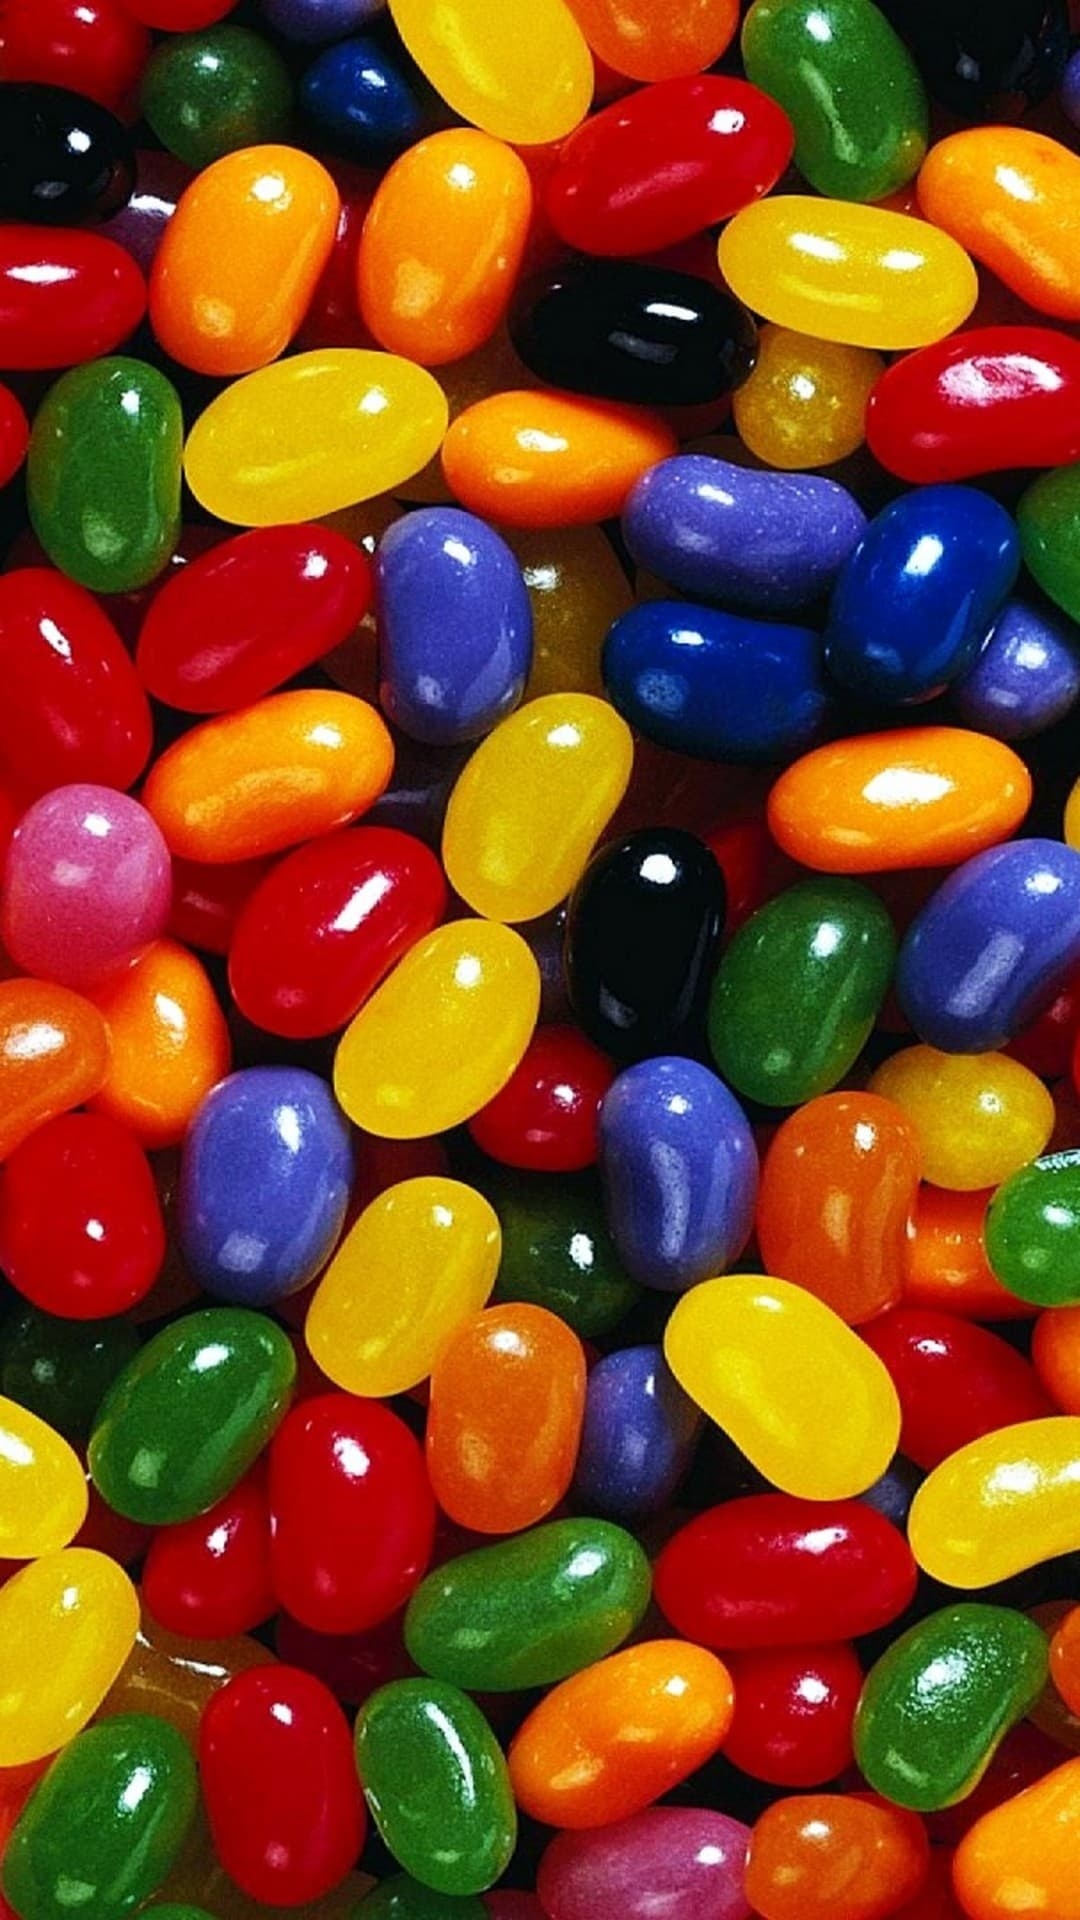 Variety of jelly beans, Assorted flavors, Yummy candies, Fun and colorful, 1080x1920 Full HD Phone